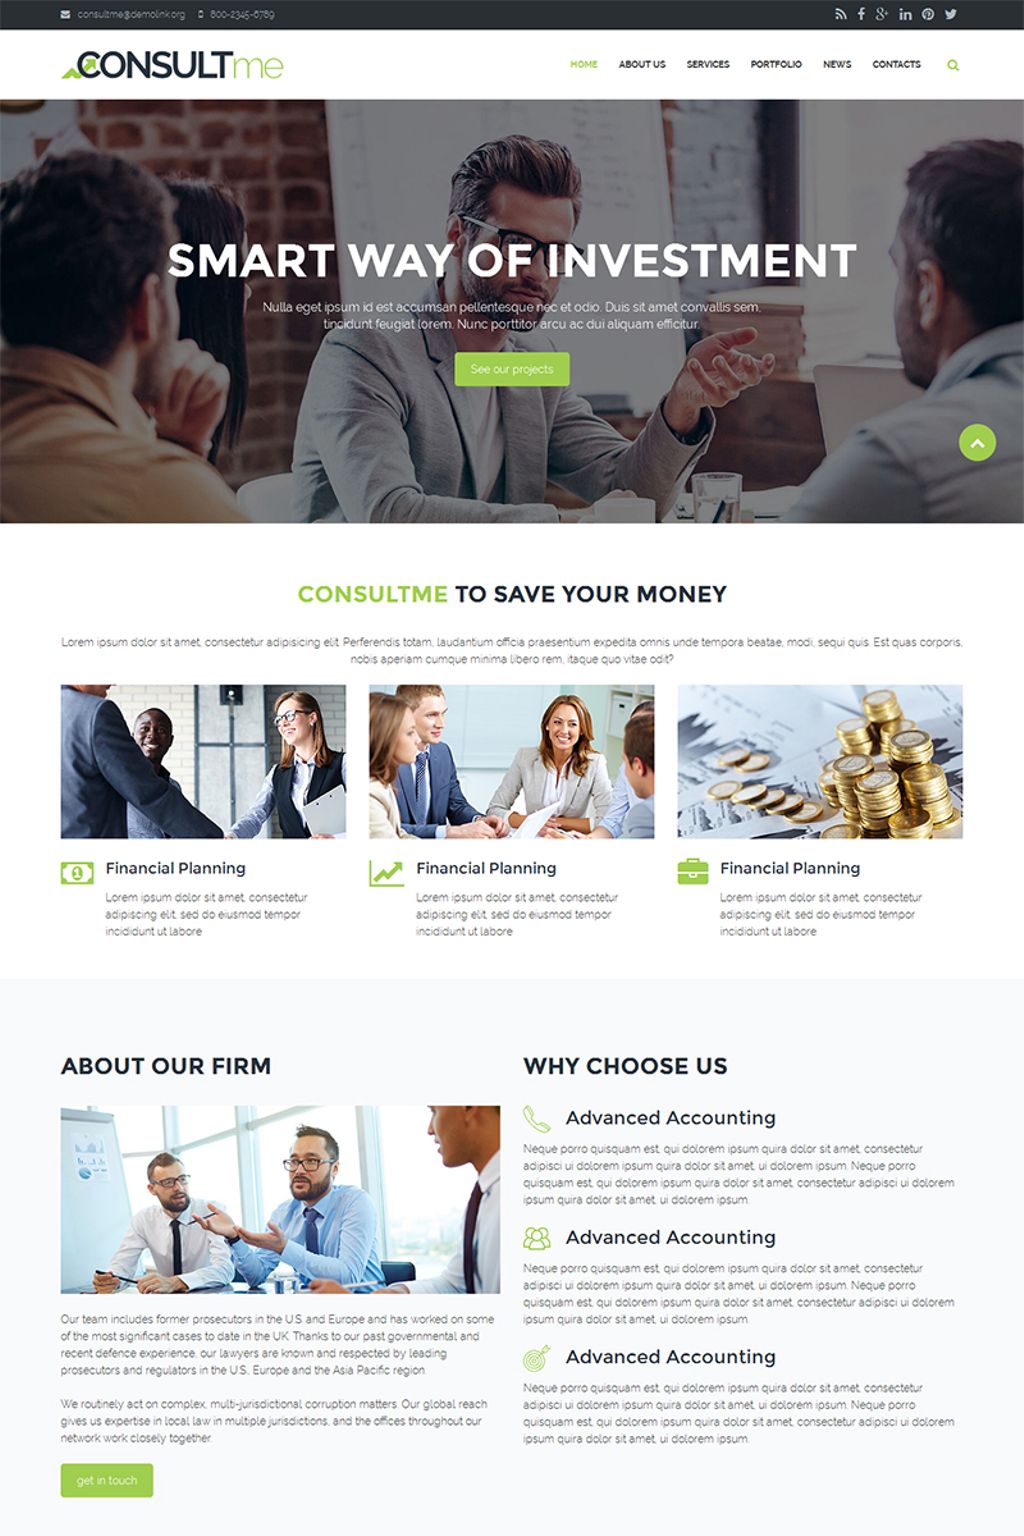  Consultme - Consult Agency Drupal Template